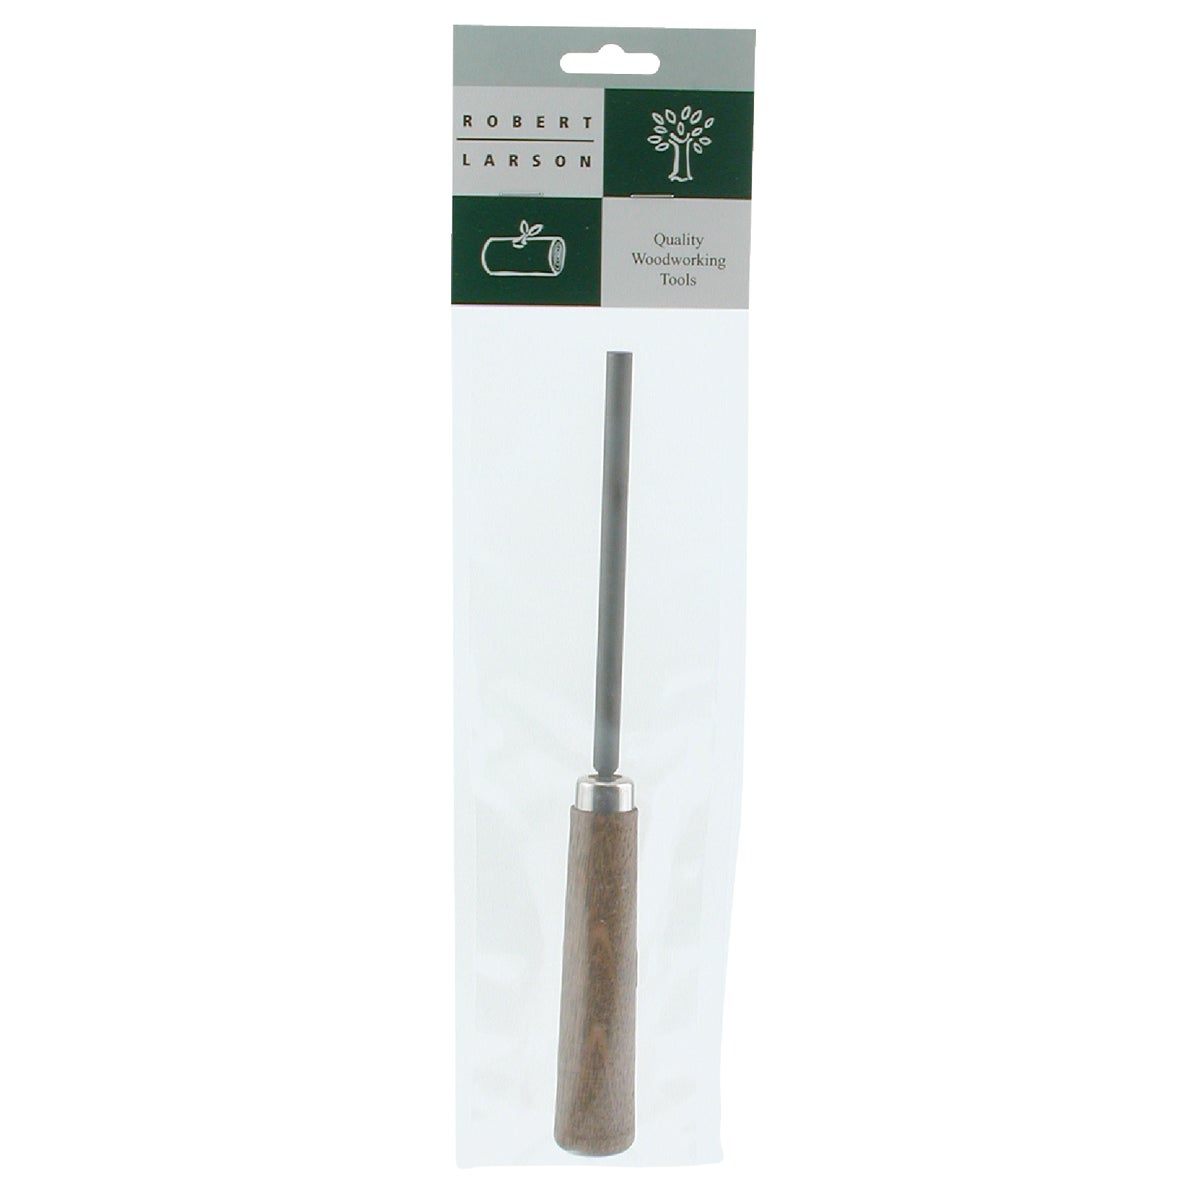 Item 315572, Oval burnisher for sharpening hand and cabinet scraper blades.